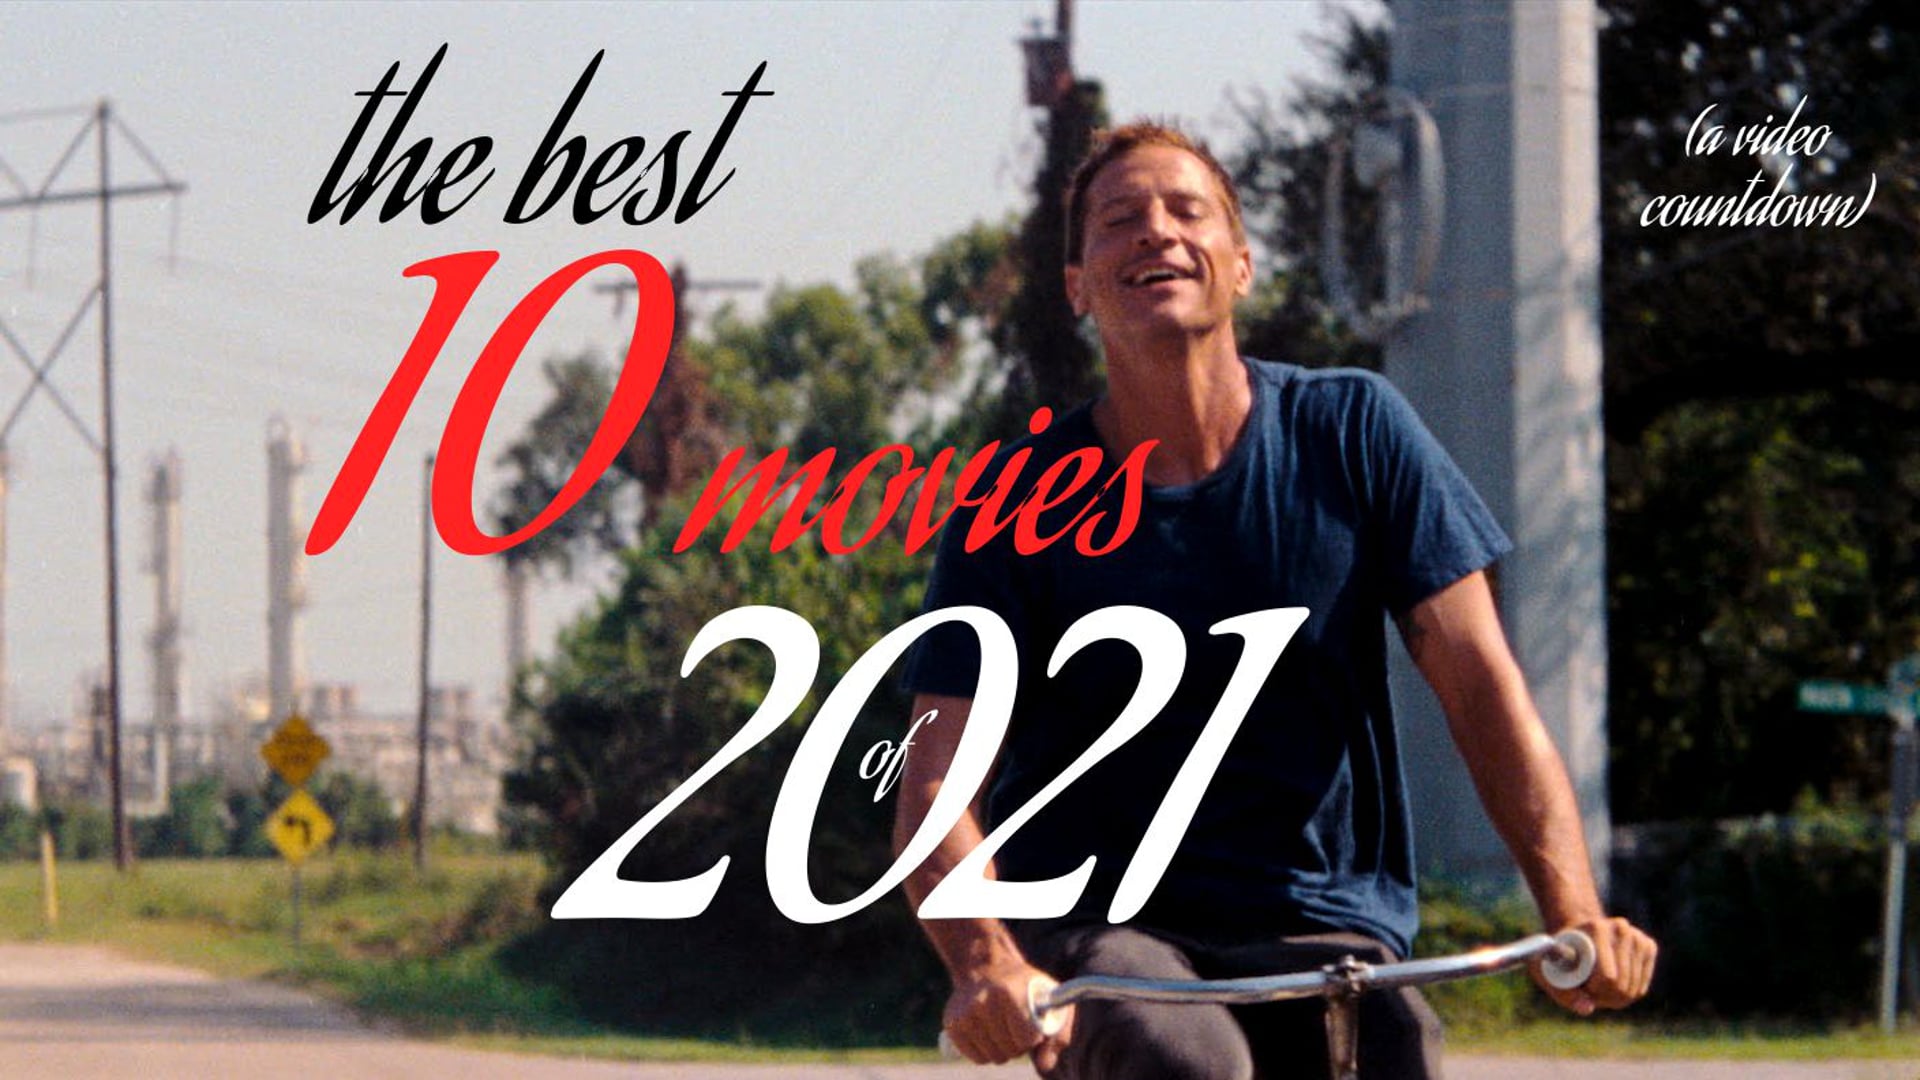 the best 10 movies of 2021 - a video countdown